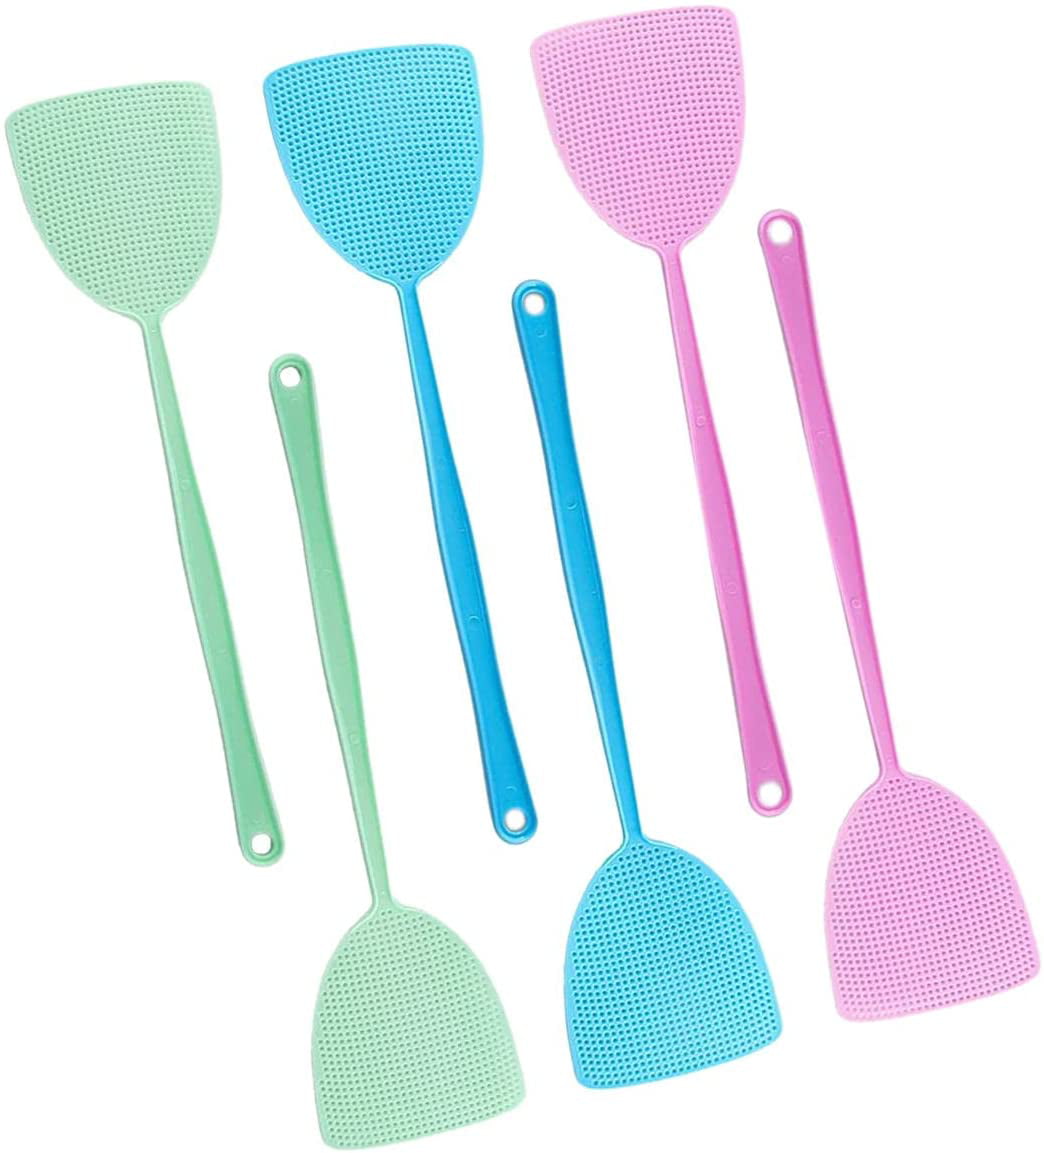 Fly Swat Swatter Bug Wasp Insect Mosquito Killer Multicolour Plastic 4pk 